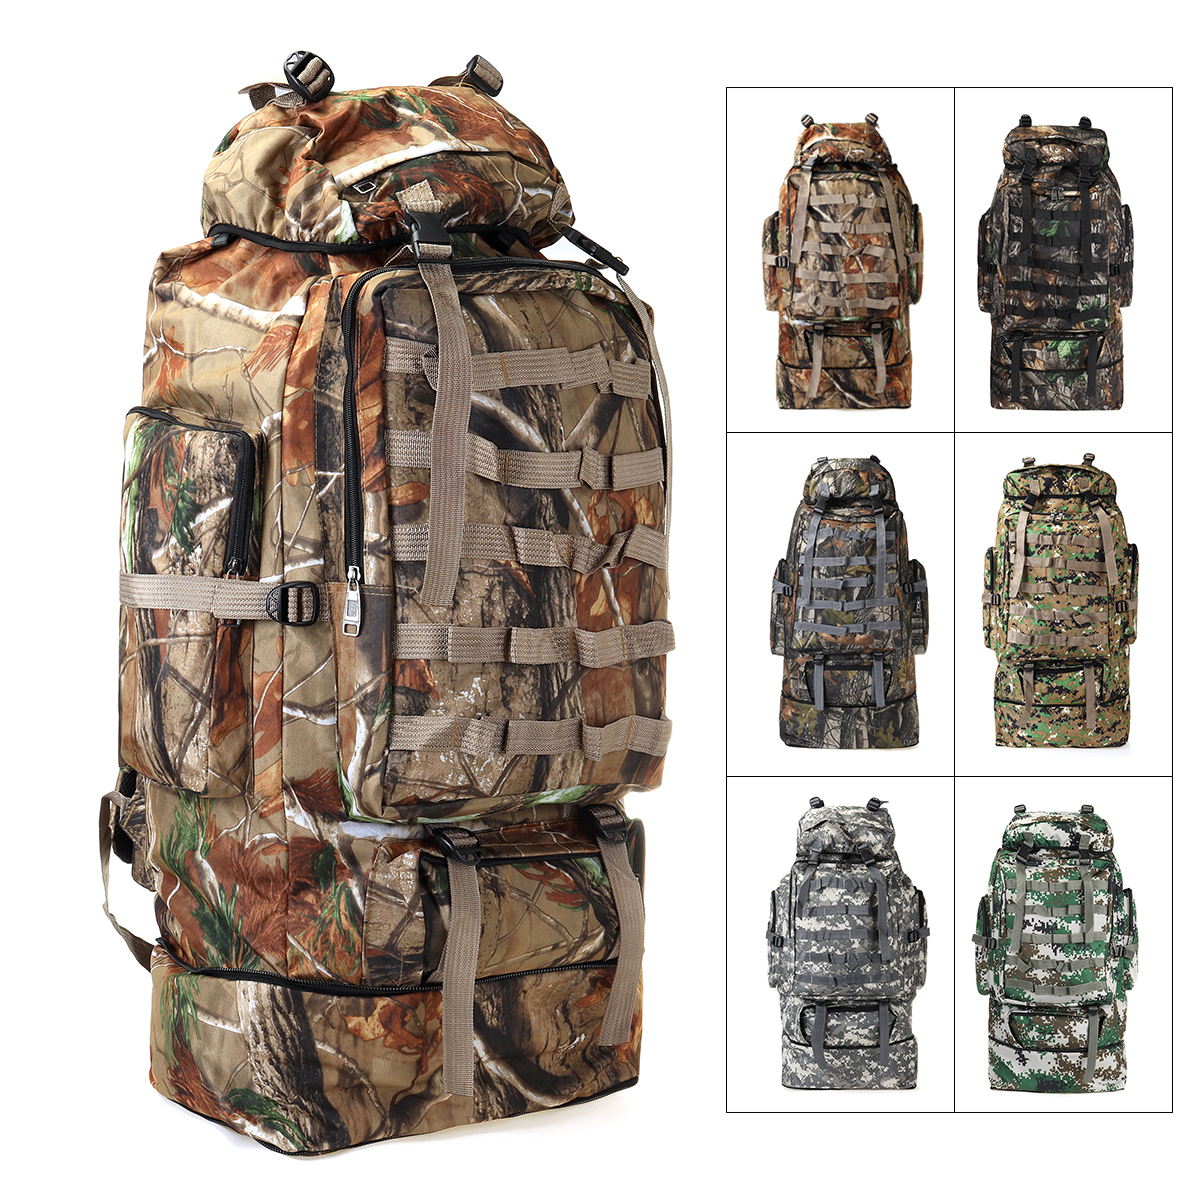 90-100L-Military-Tactical-Backpack-Waterproof-Molle-Climbing-Bag-Outdoor-Trekking-Camping-1865666-3